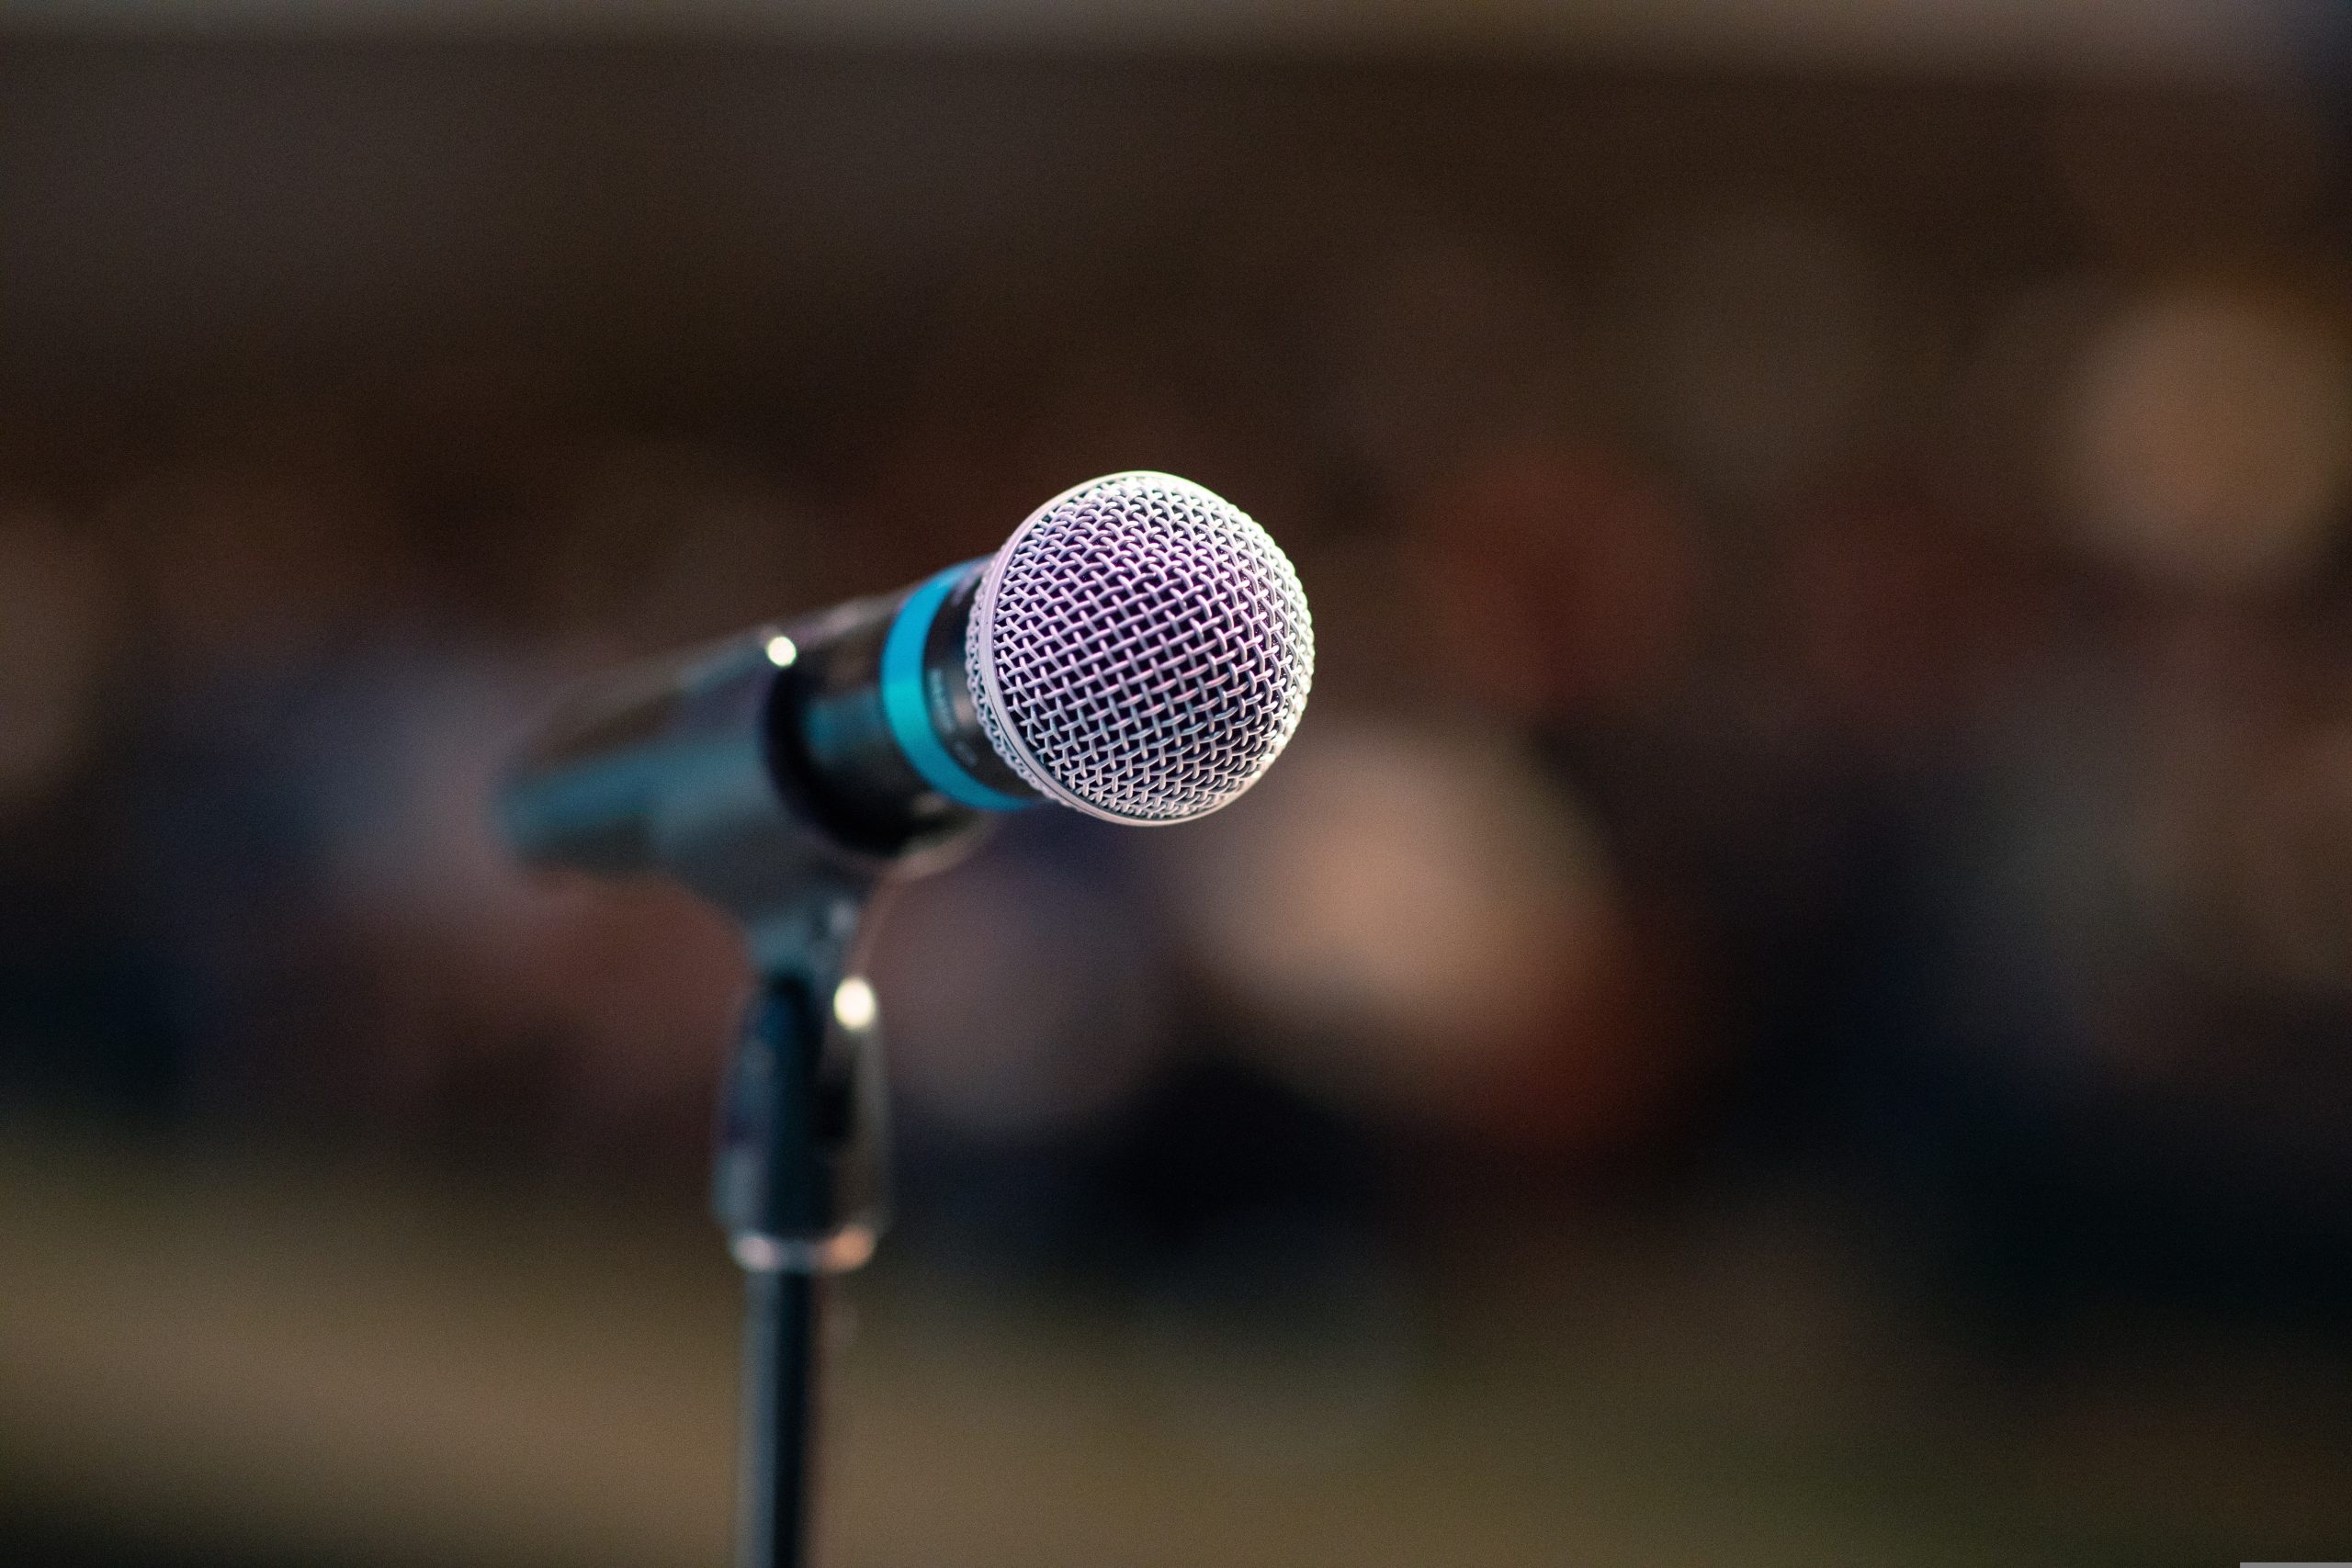 A photo of a microphone.